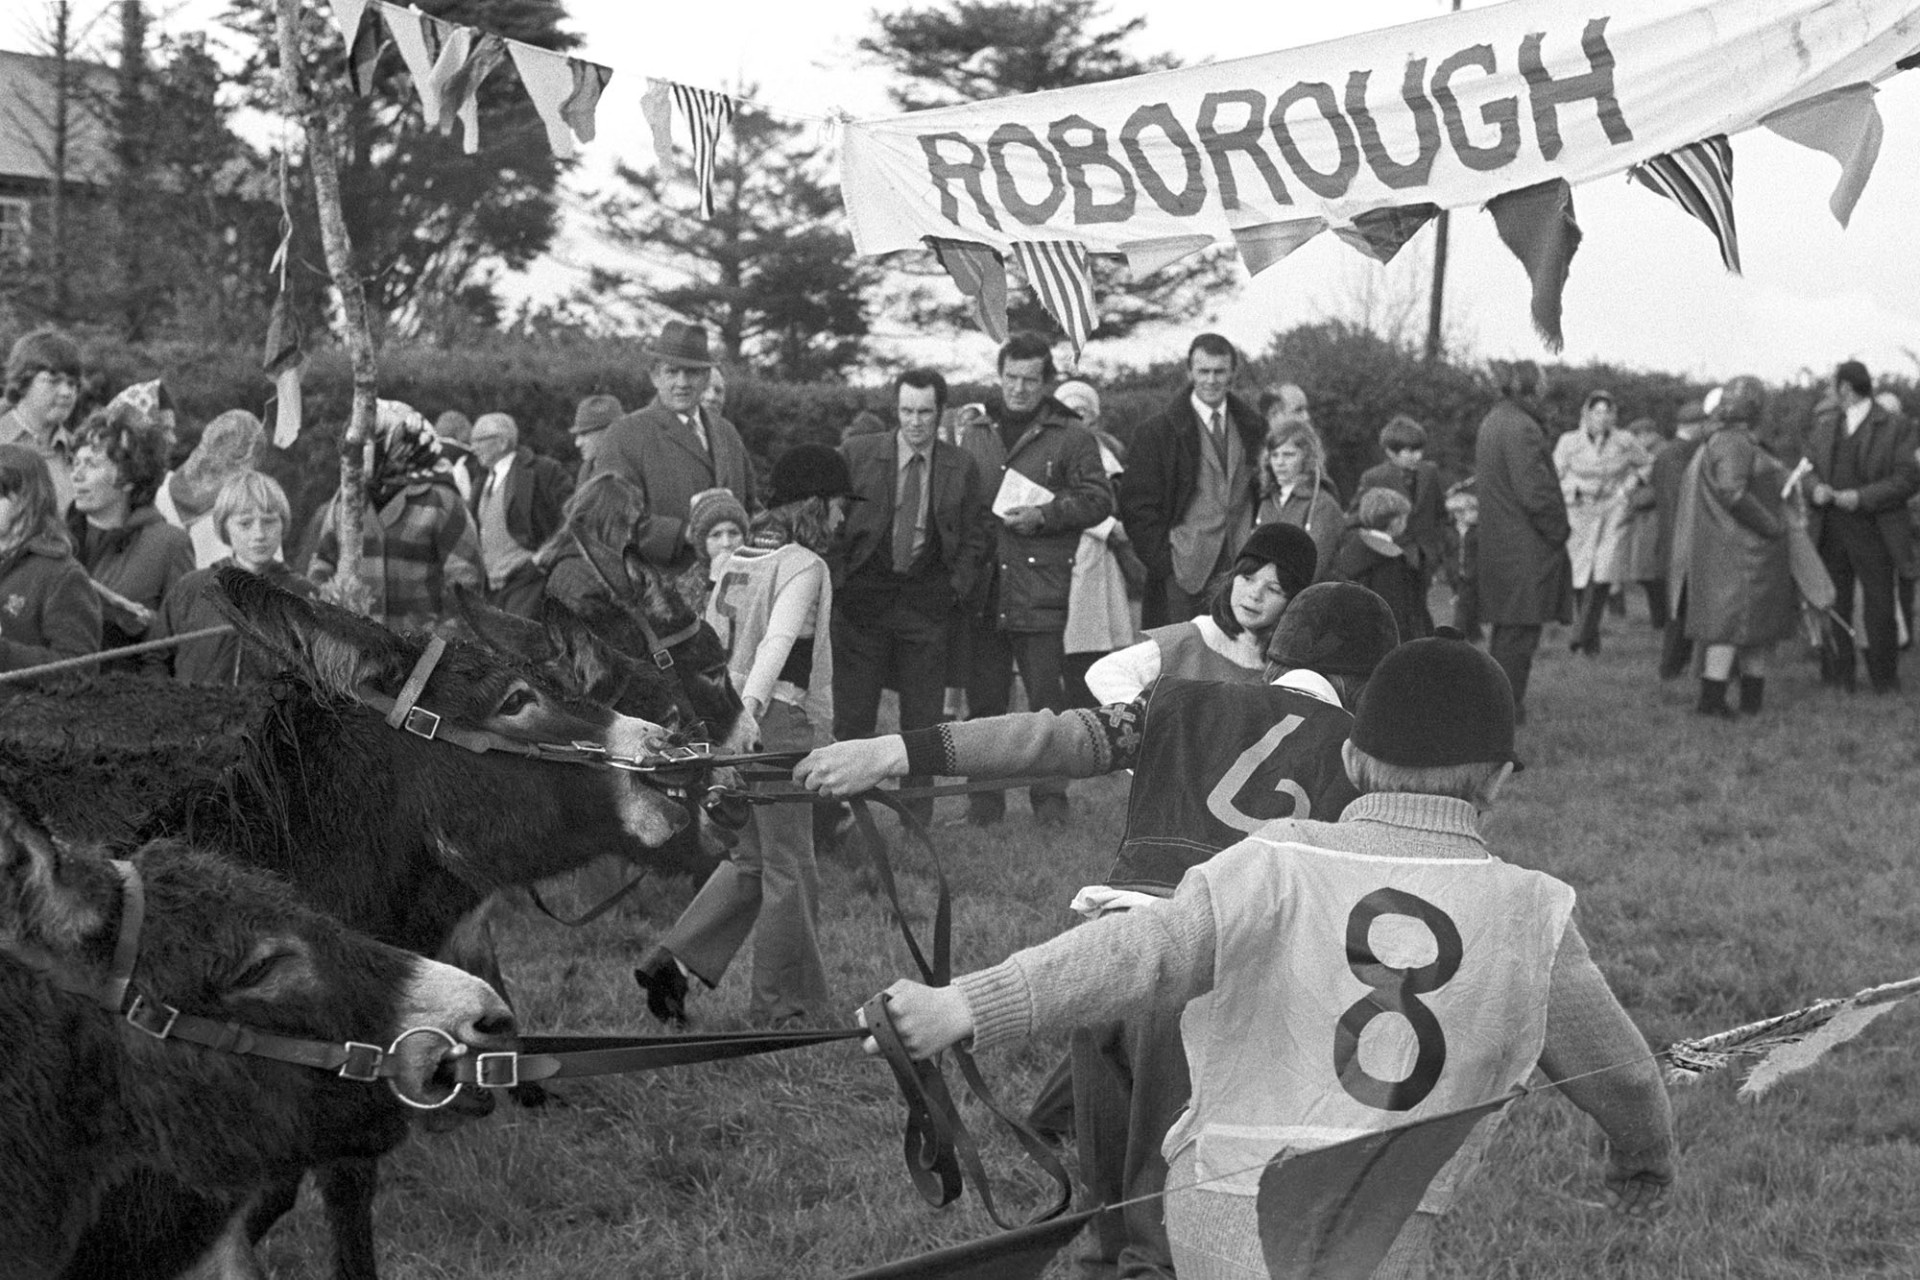 Donkey Derby, Jockeys and crowd. 
[Children leading their donkeys under a banner with 'Roborough' written on it, and past spectators watching the derby at Roborough.]